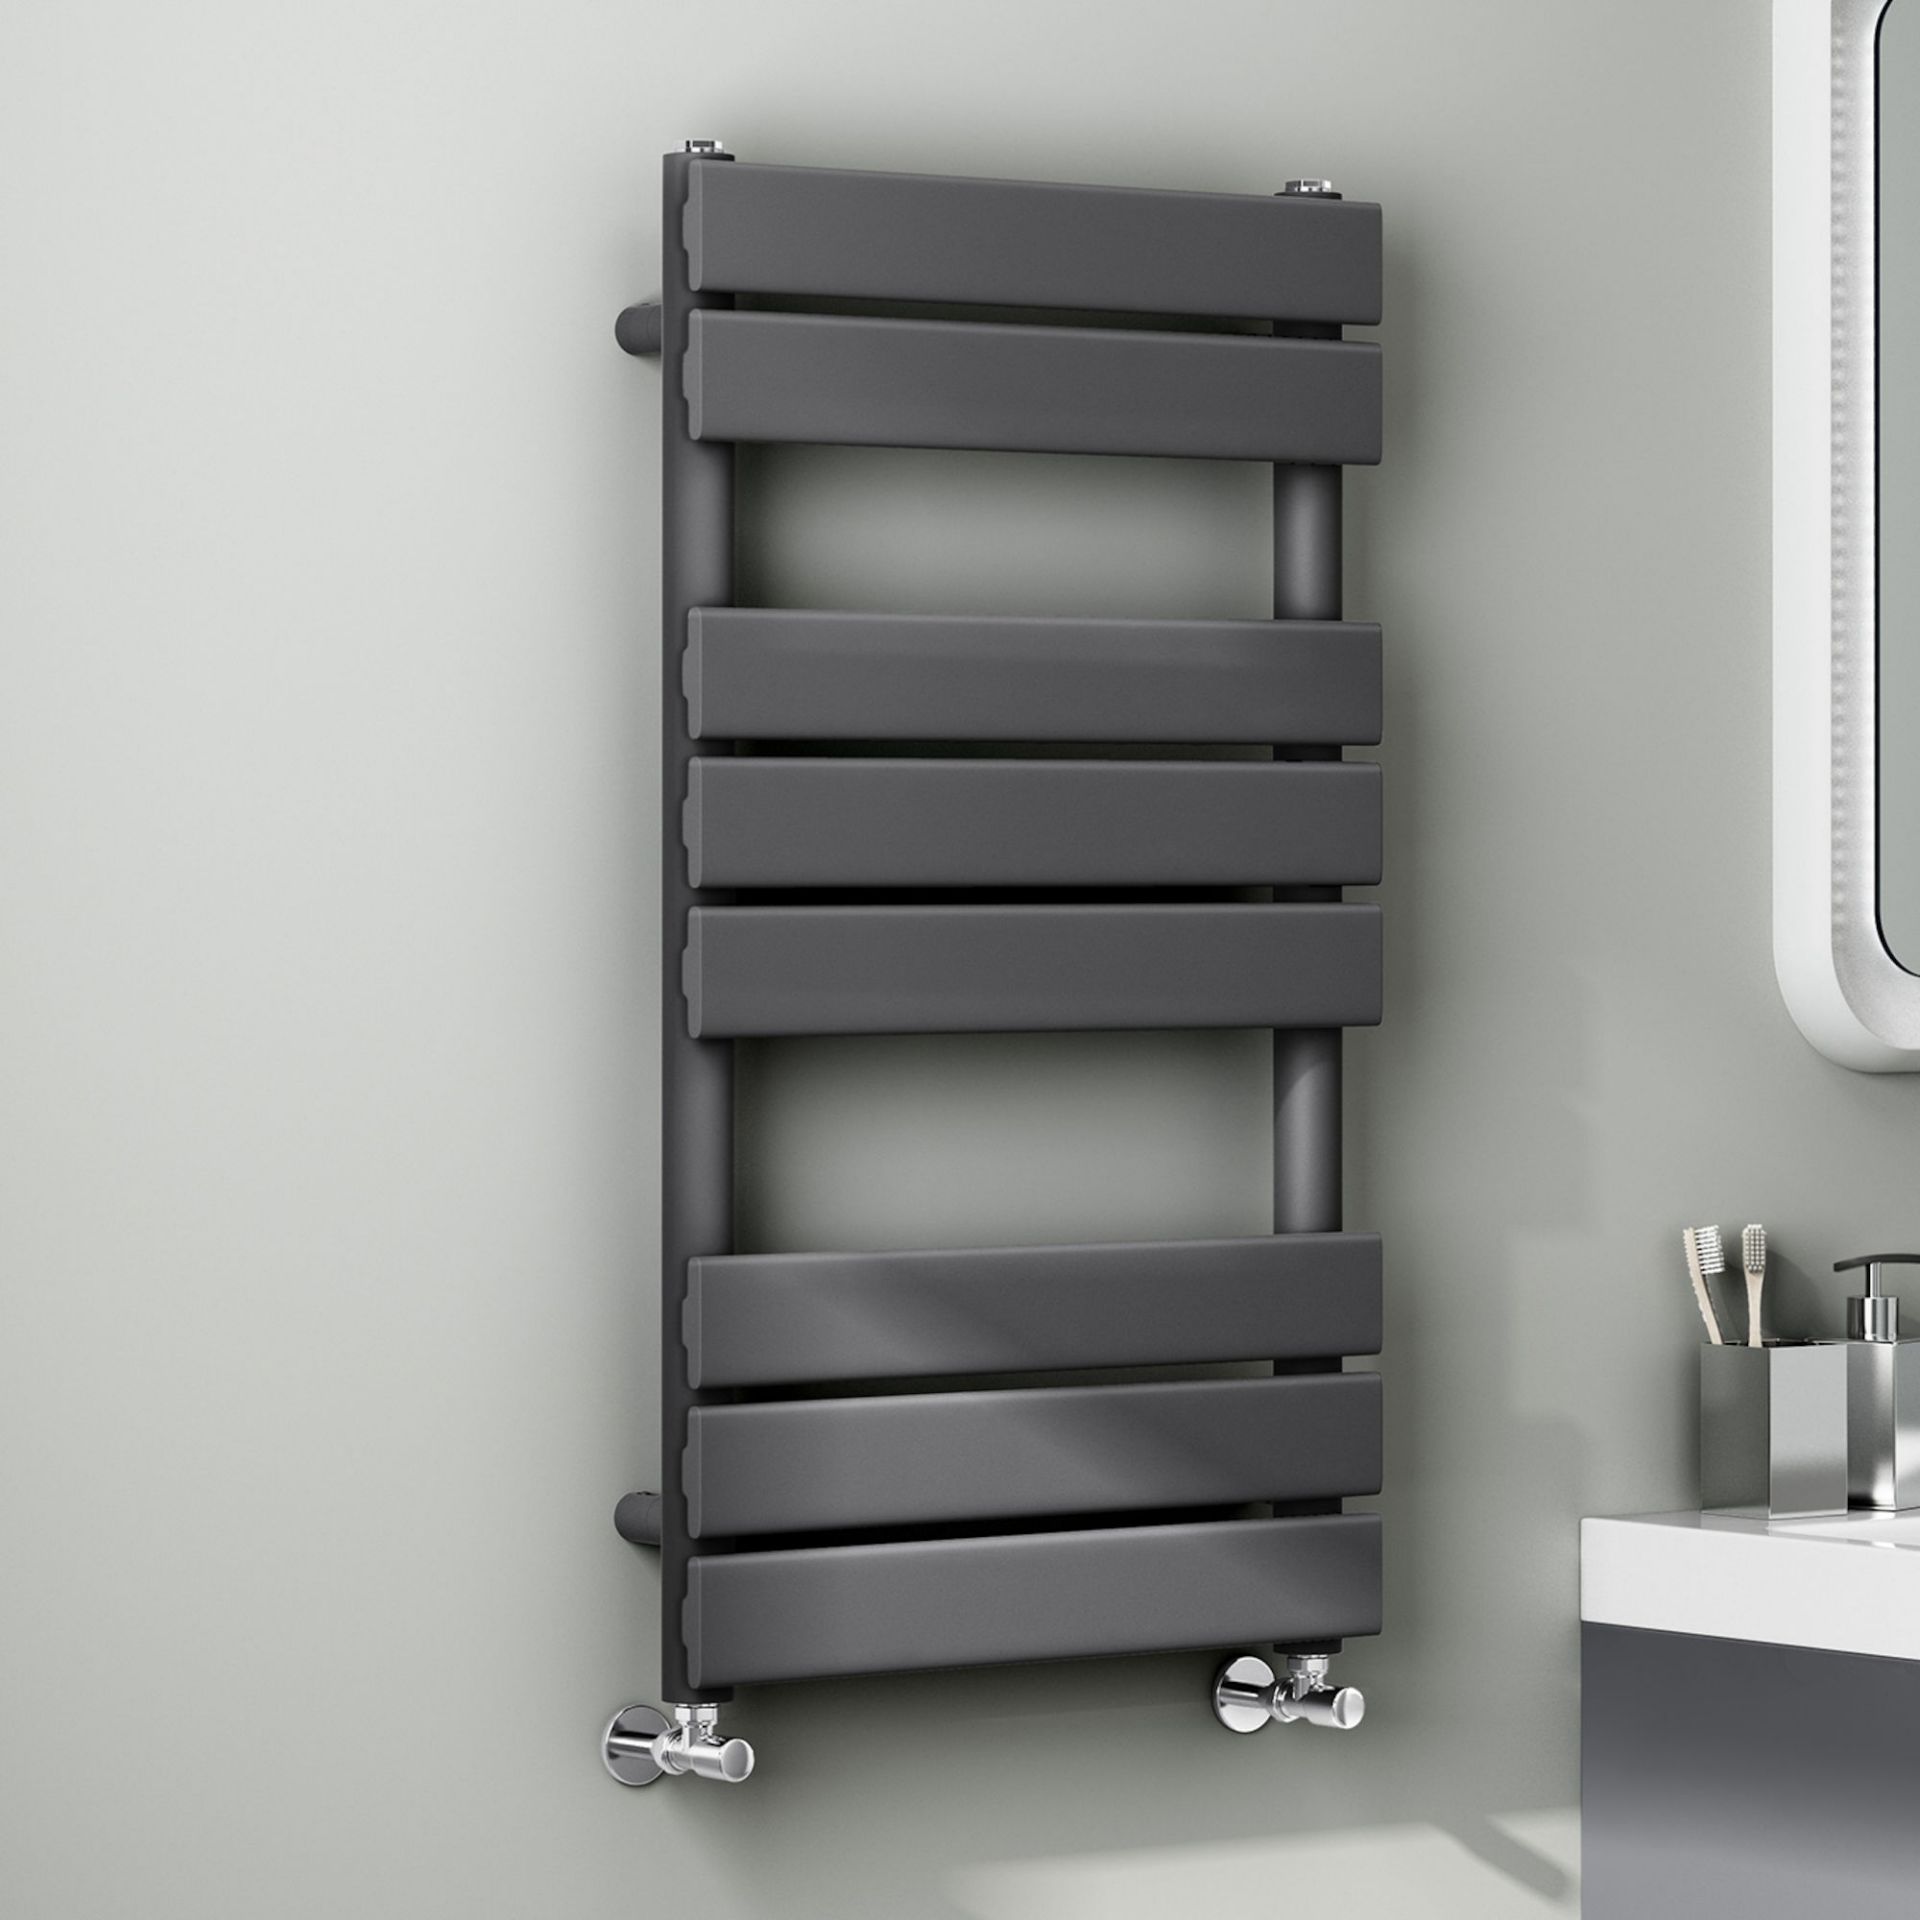 (MQ61) 800x450mm Anthracite Flat Panel Ladder Towel Radiator. RRP £235.99. Made with low carbo...